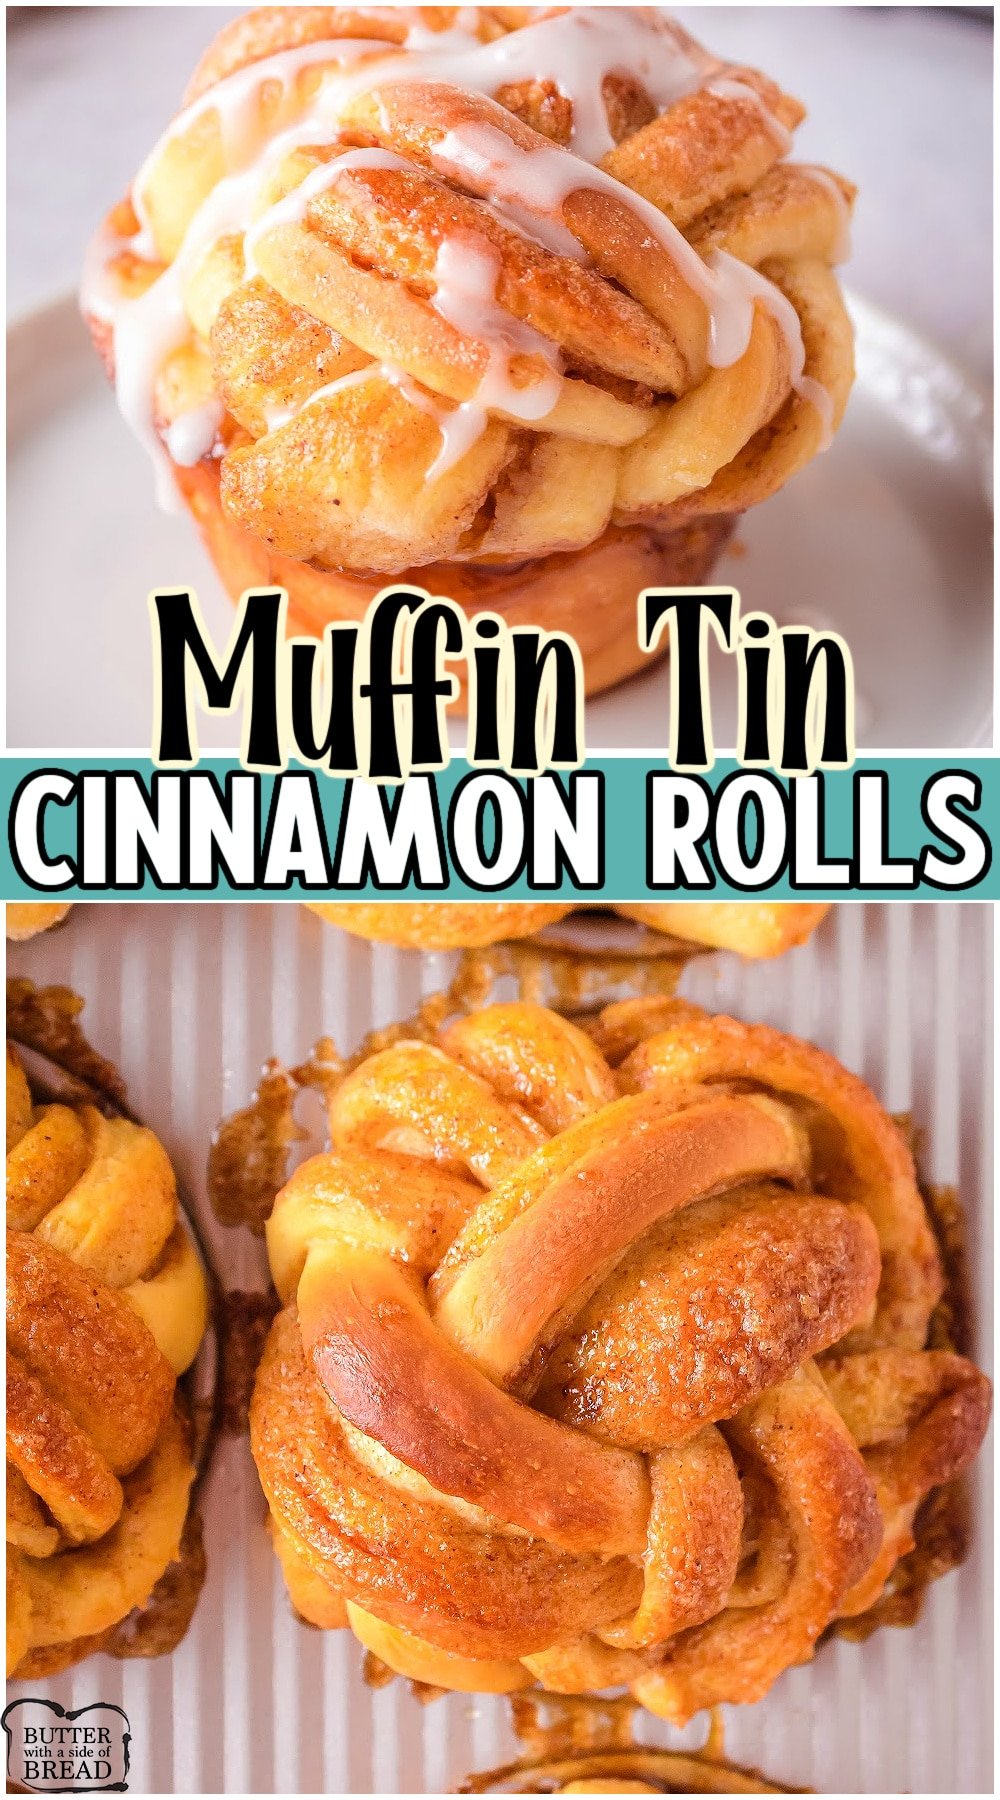 Muffin Tin cinnamon rolls made with traditional ingredients, then braided & baked in a muffin tin! Made from scratch these braided cinnamon rolls are fun & delicious! 